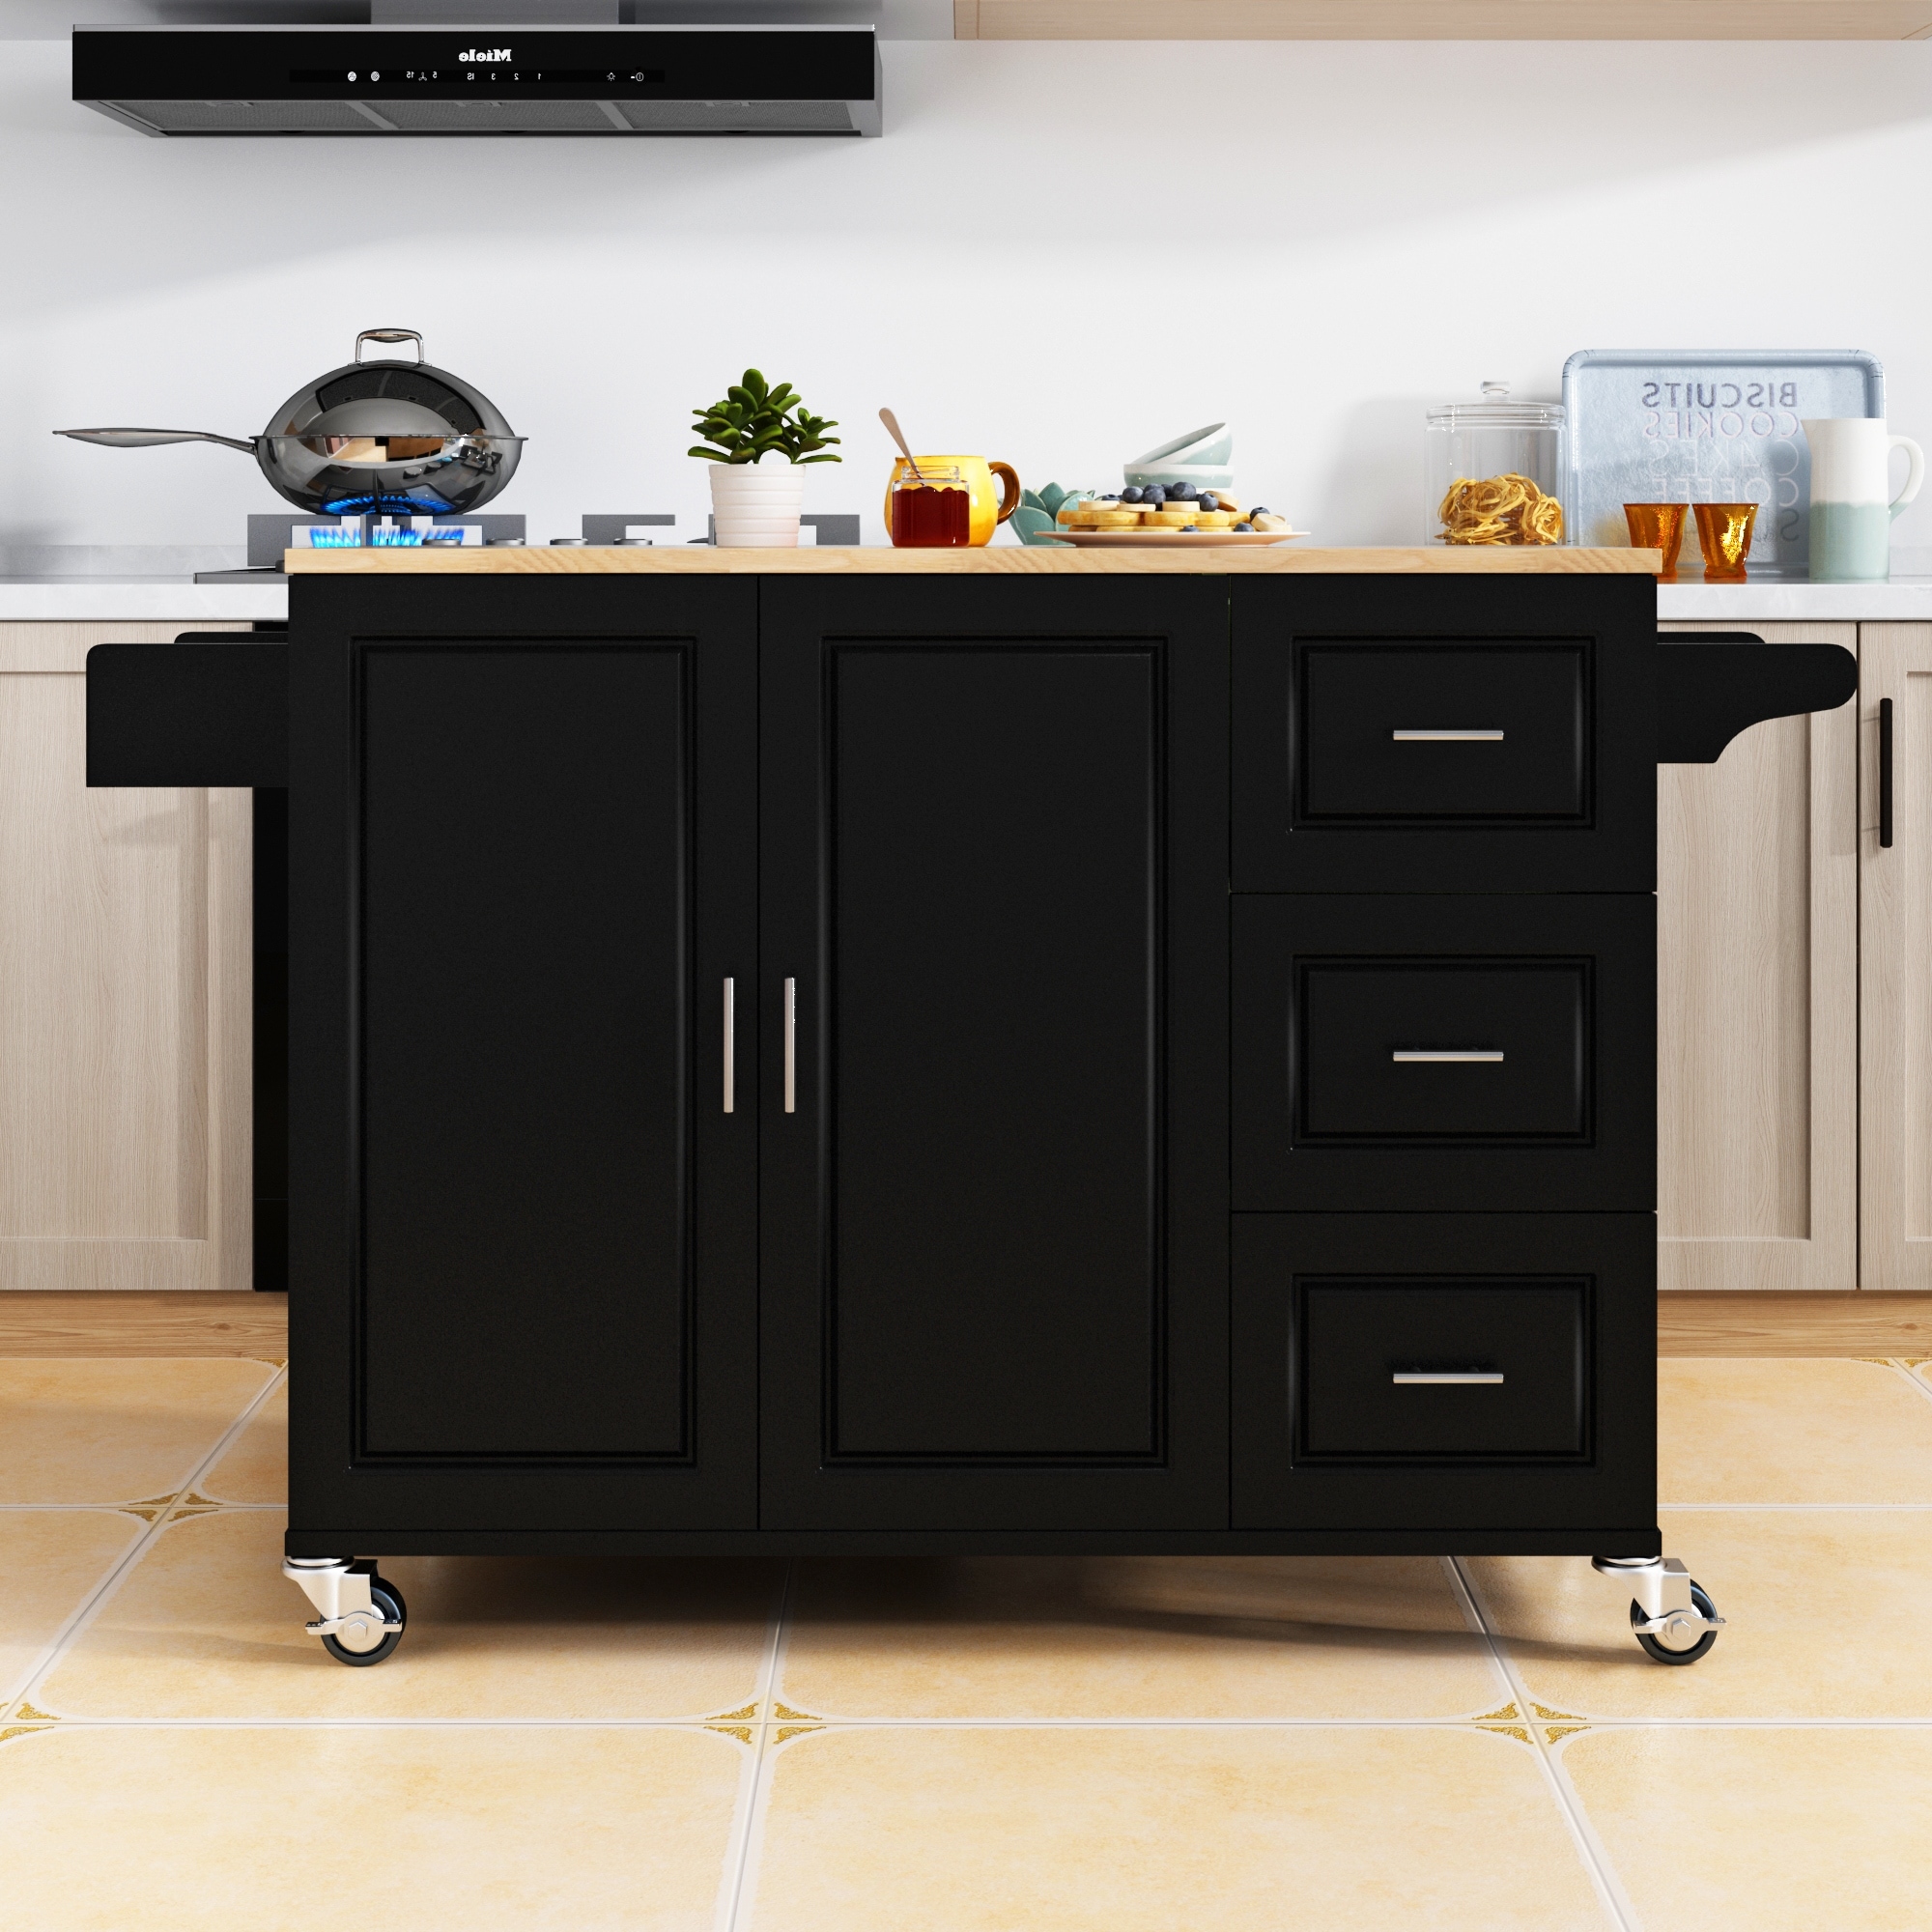 https://ak1.ostkcdn.com/images/products/is/images/direct/2f534bb654575e053b5489cc9a5a610910eac613/Mobile-Kitchen-Island-with-Extensible-Rubber-Wood-Table-Top.jpg